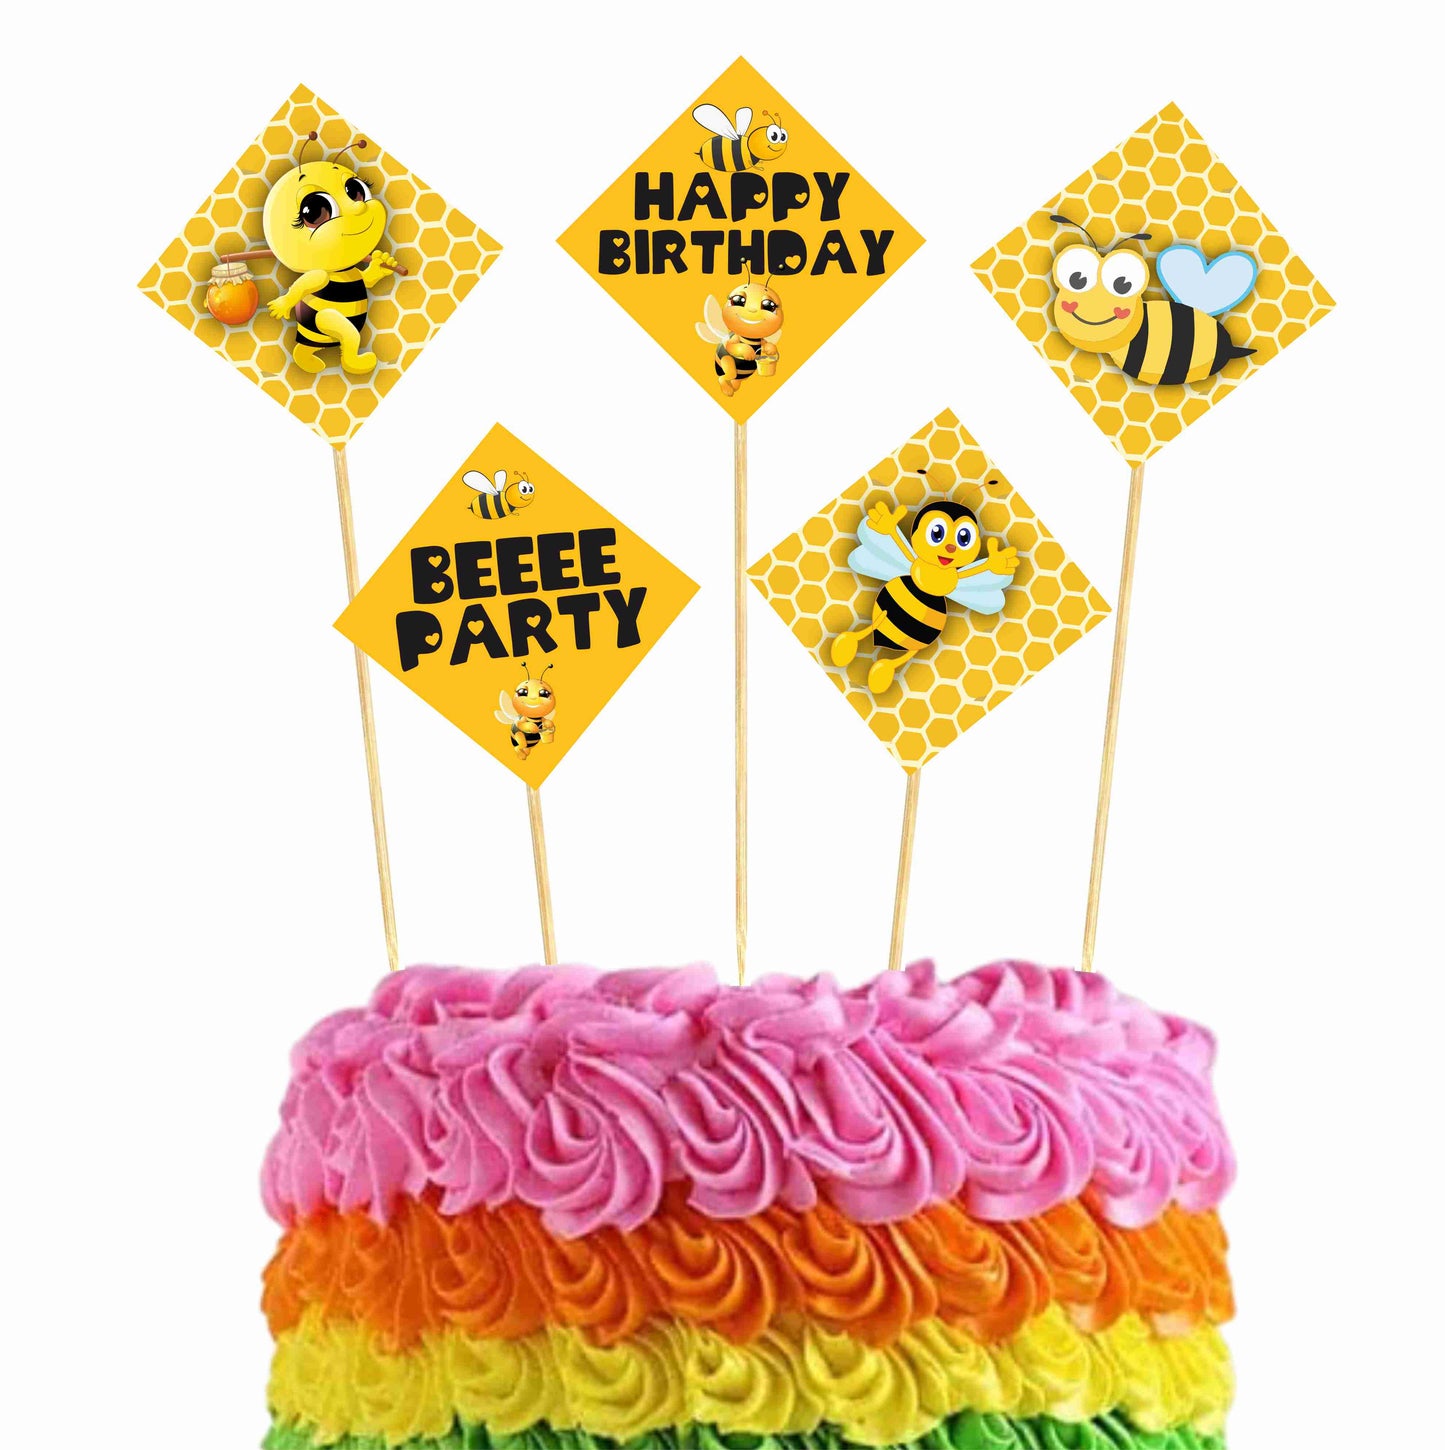 Honey Bee Theme Cake Topper Pack of 10 Nos for Birthday Cake Decoration Theme Party Item For Boys Girls Adults Birthday Theme Decor